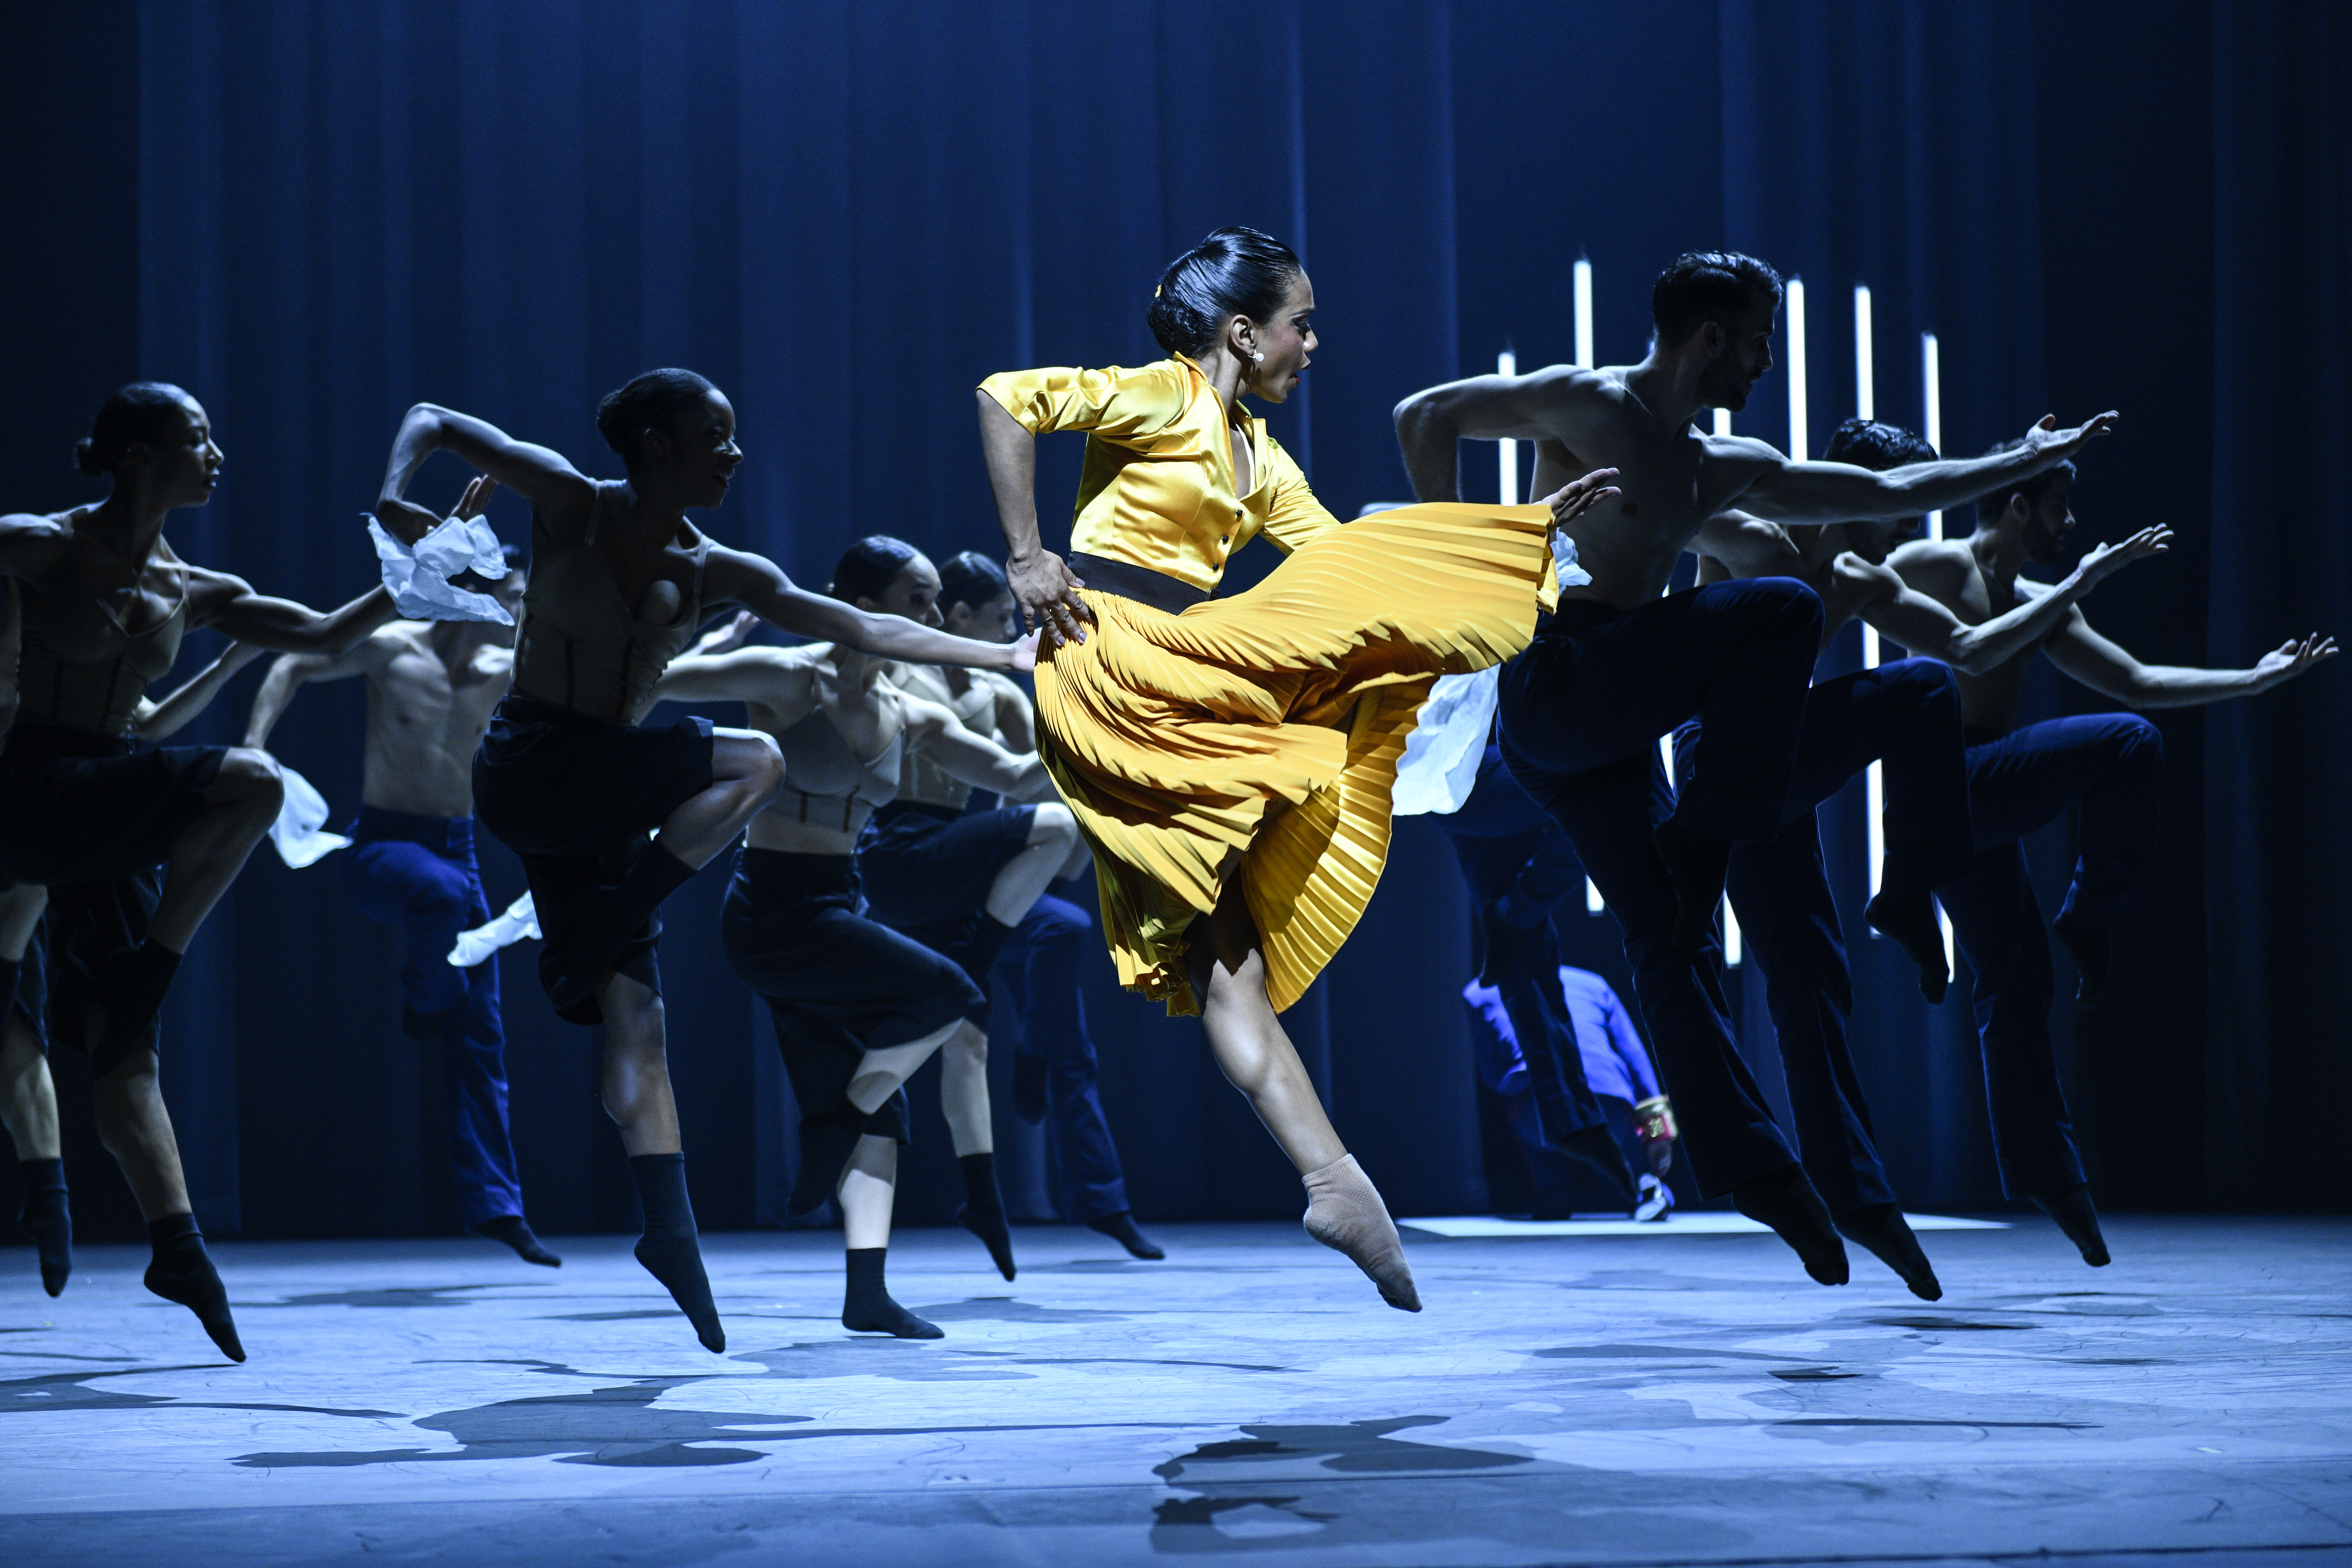 Dandara Vega, costumed in a bright yellow dress with leated skirt, jumps in a parallel passé. She is spotlit and dances at the front of a large group, who do the same step behind her.